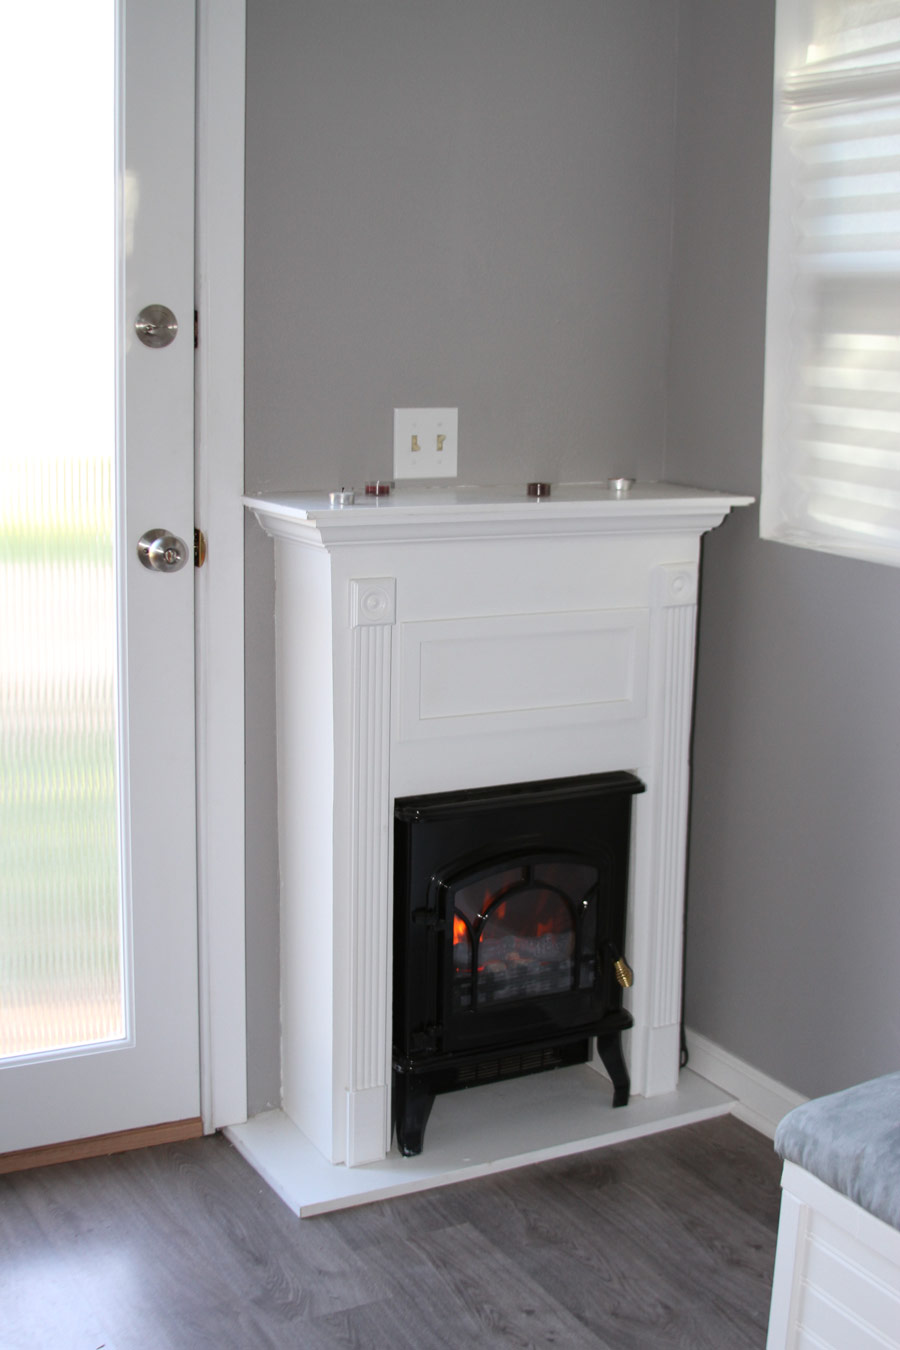 Fireplace Mantel Height New Pin by Linda Wallace On Decorating Country Cottage In